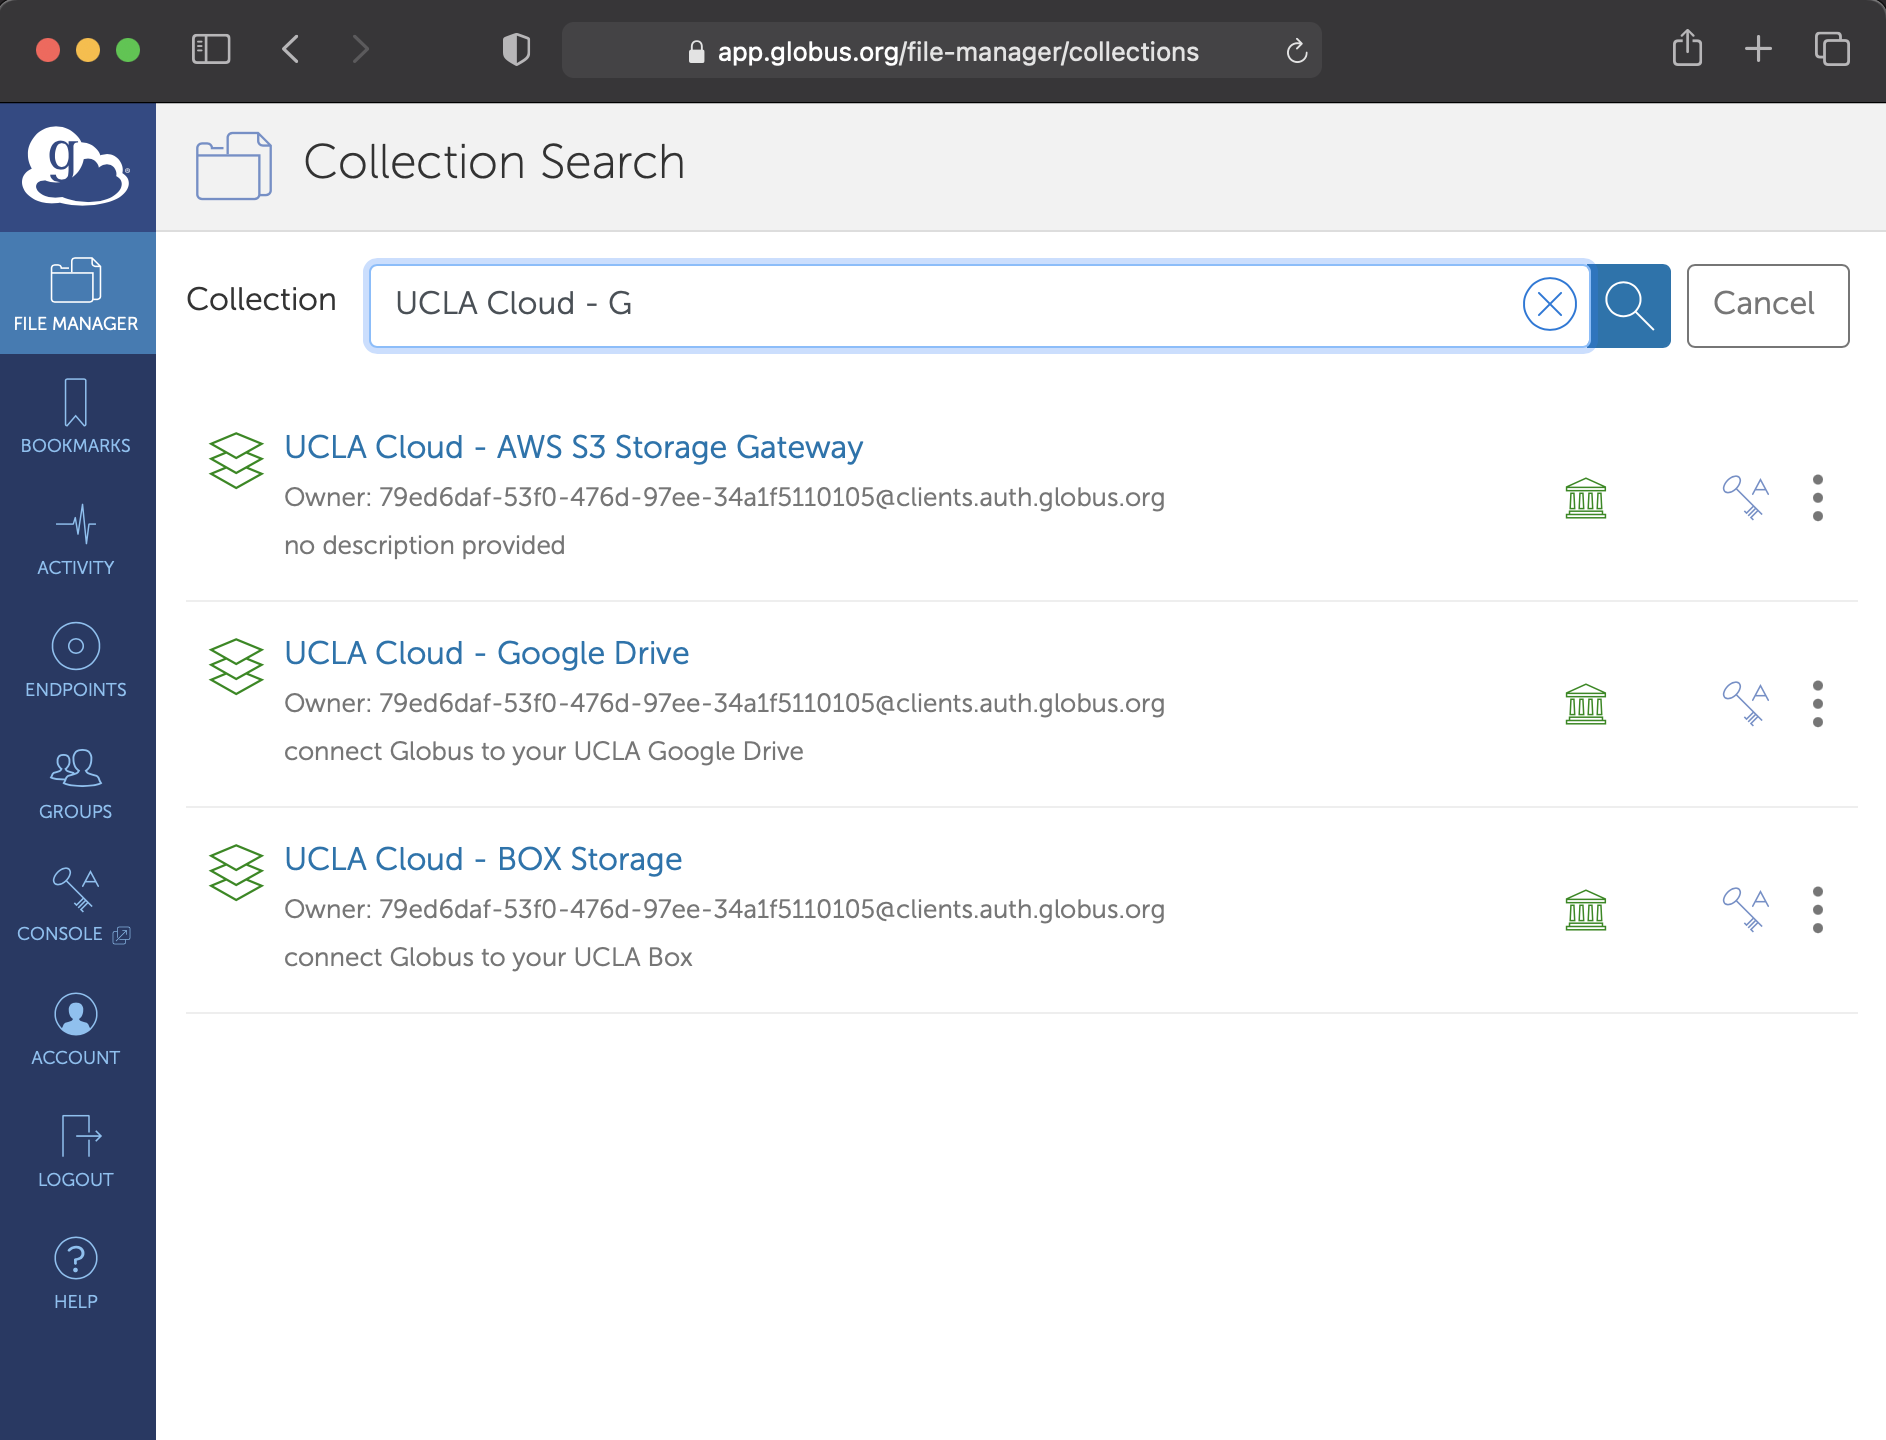 Image of Globus web application, UCLA Google Drive and Box endpoints